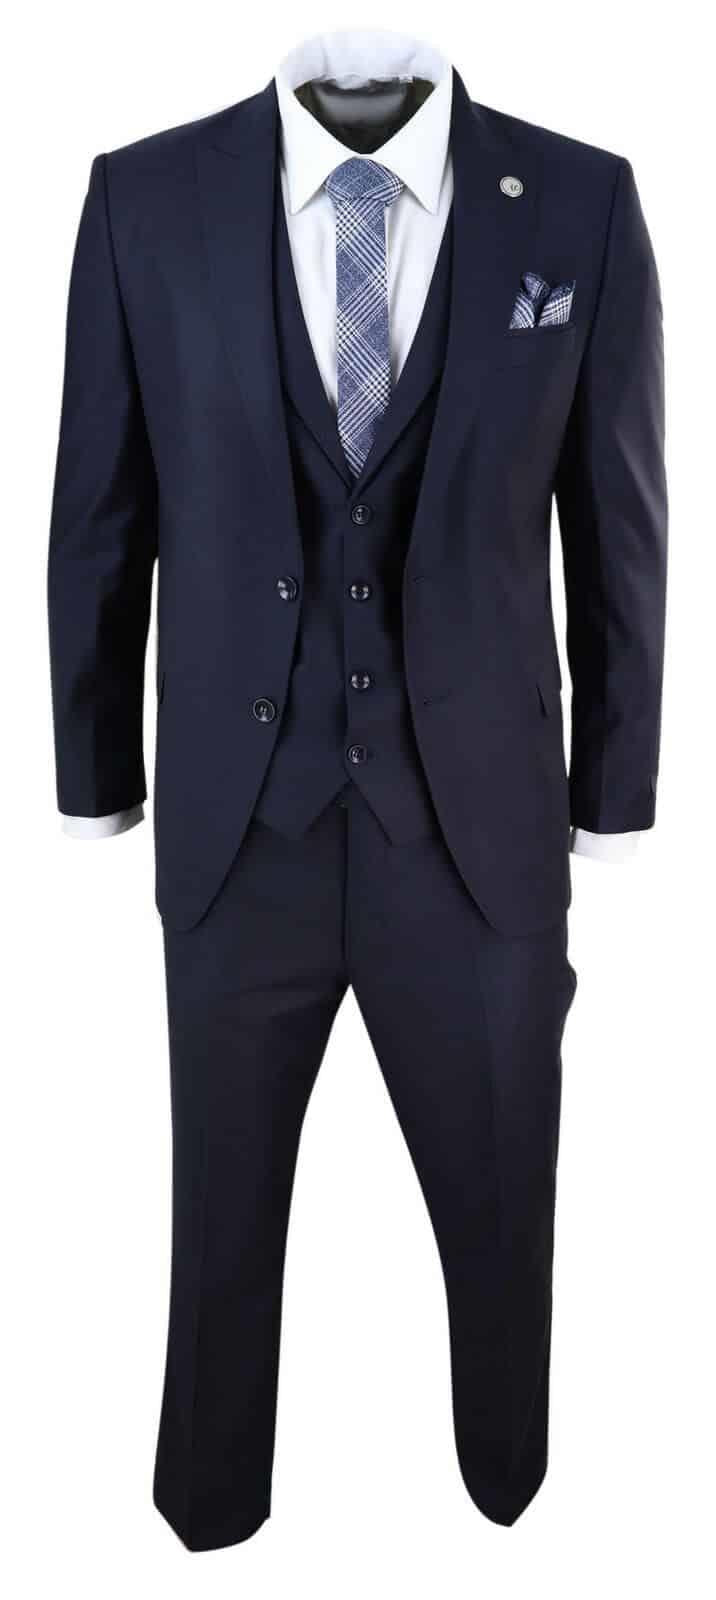 New Mens 3 Piece Suit Plain Navy Classic Tailored Fit Smart Casual 1920s Formal - Upperclass Fashions 